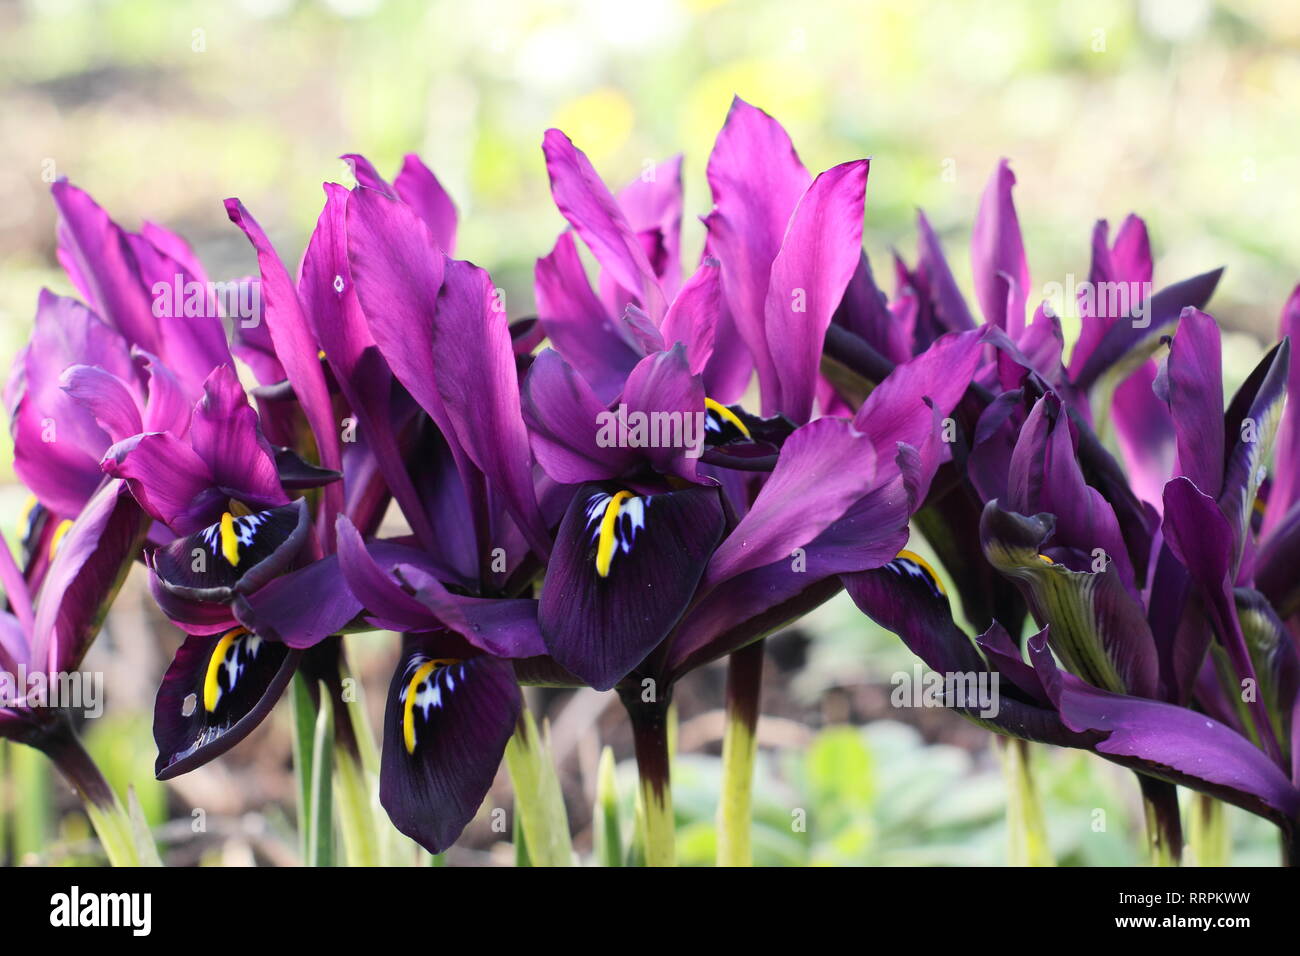 Iris histrioides 'George'. Early spring late winter flowers of Iris 'George' in an English garden, February, UK. Also called Iris reticulata' George'. Stock Photo